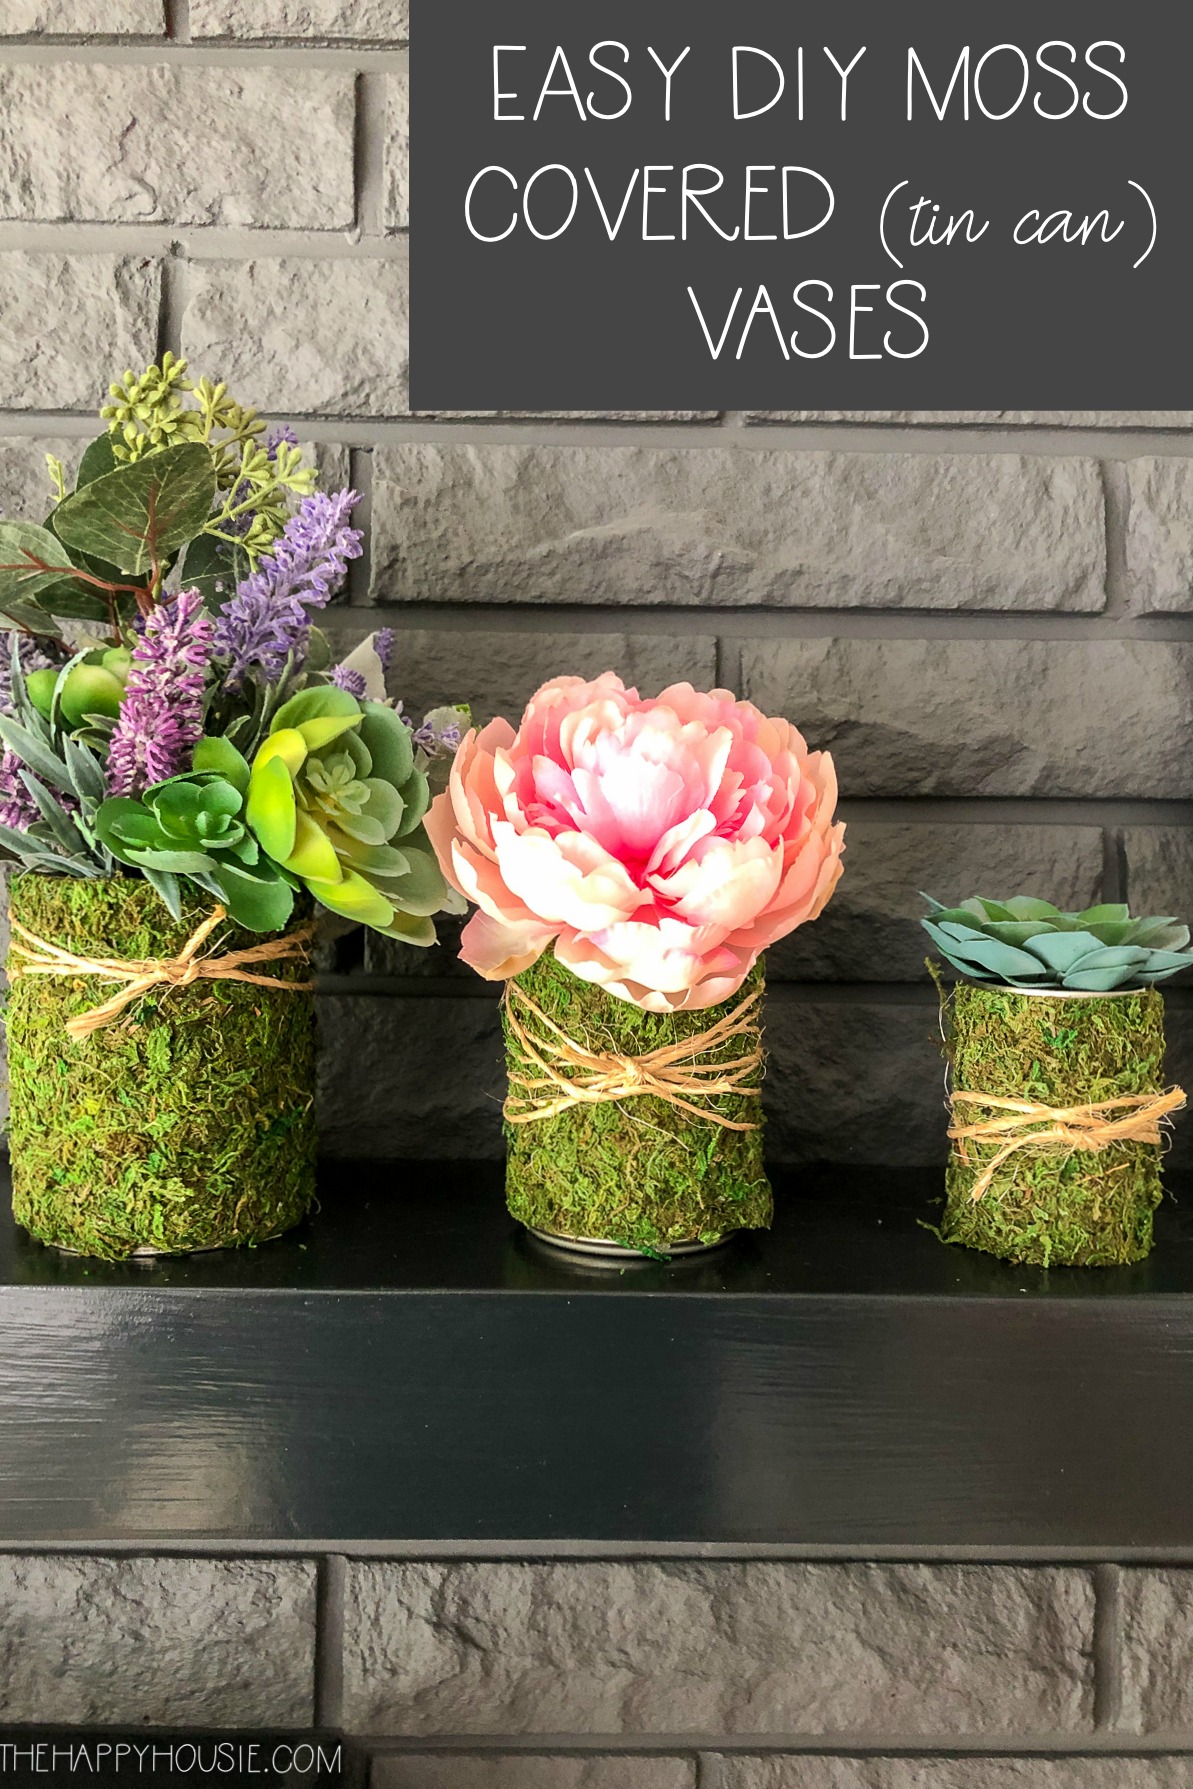 Easy DIY moss covered vases graphic.